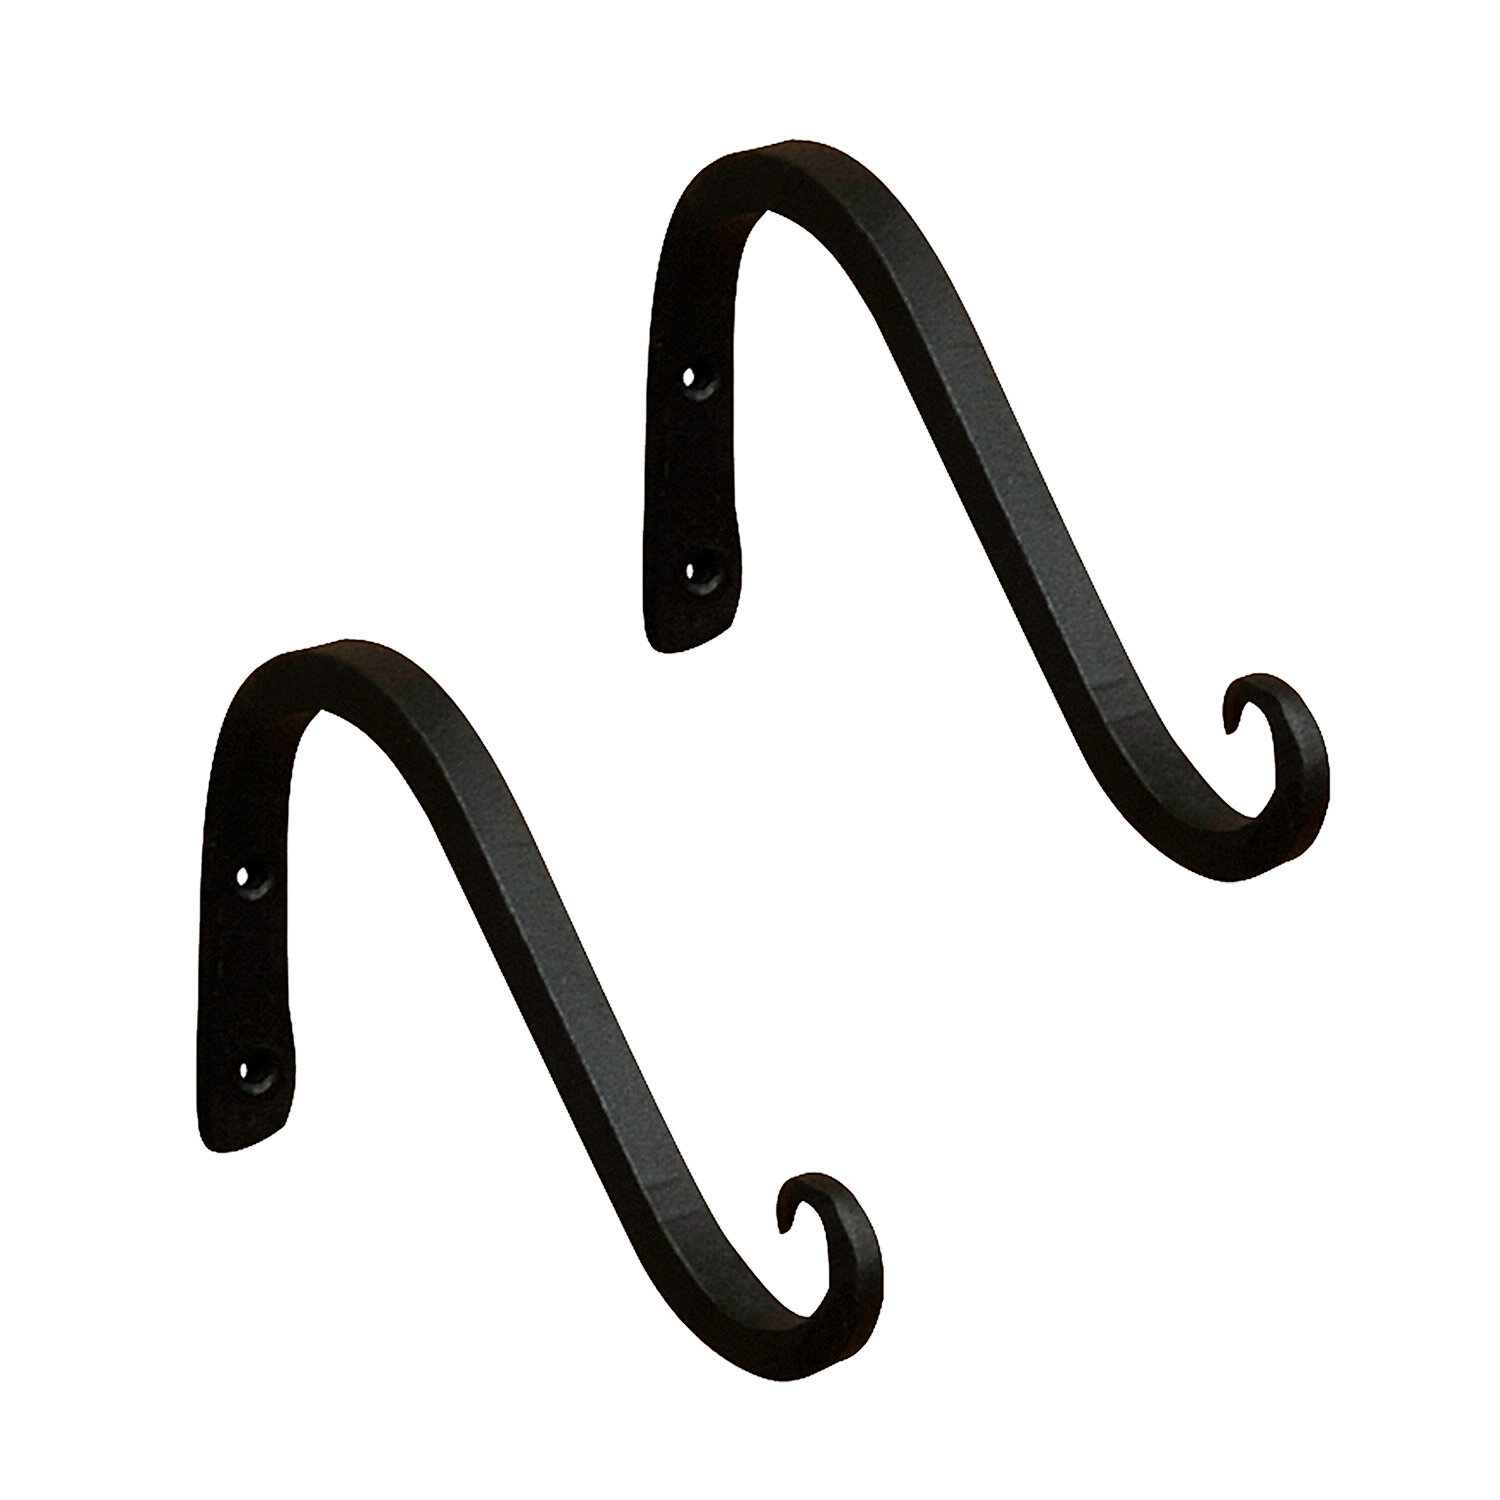 Achla Designs TSH-07-2 6 in. Angled Upcurled Bracket Black - Pack of 2